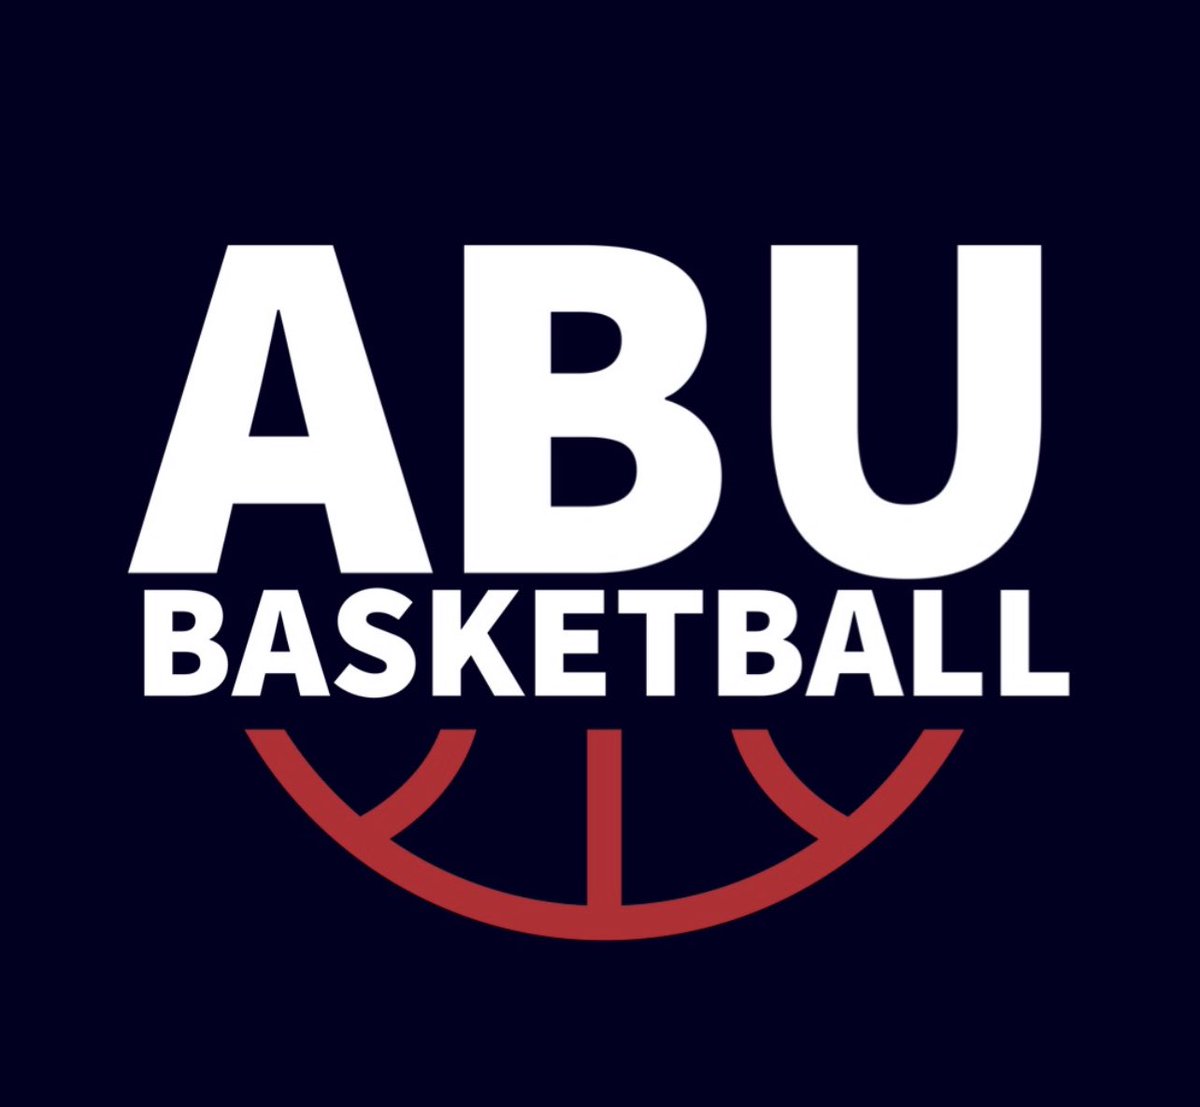 Blessed to receive a offer from Arlington Baptist University. Thank you @StarnesTony for believing in me. #gopatriots